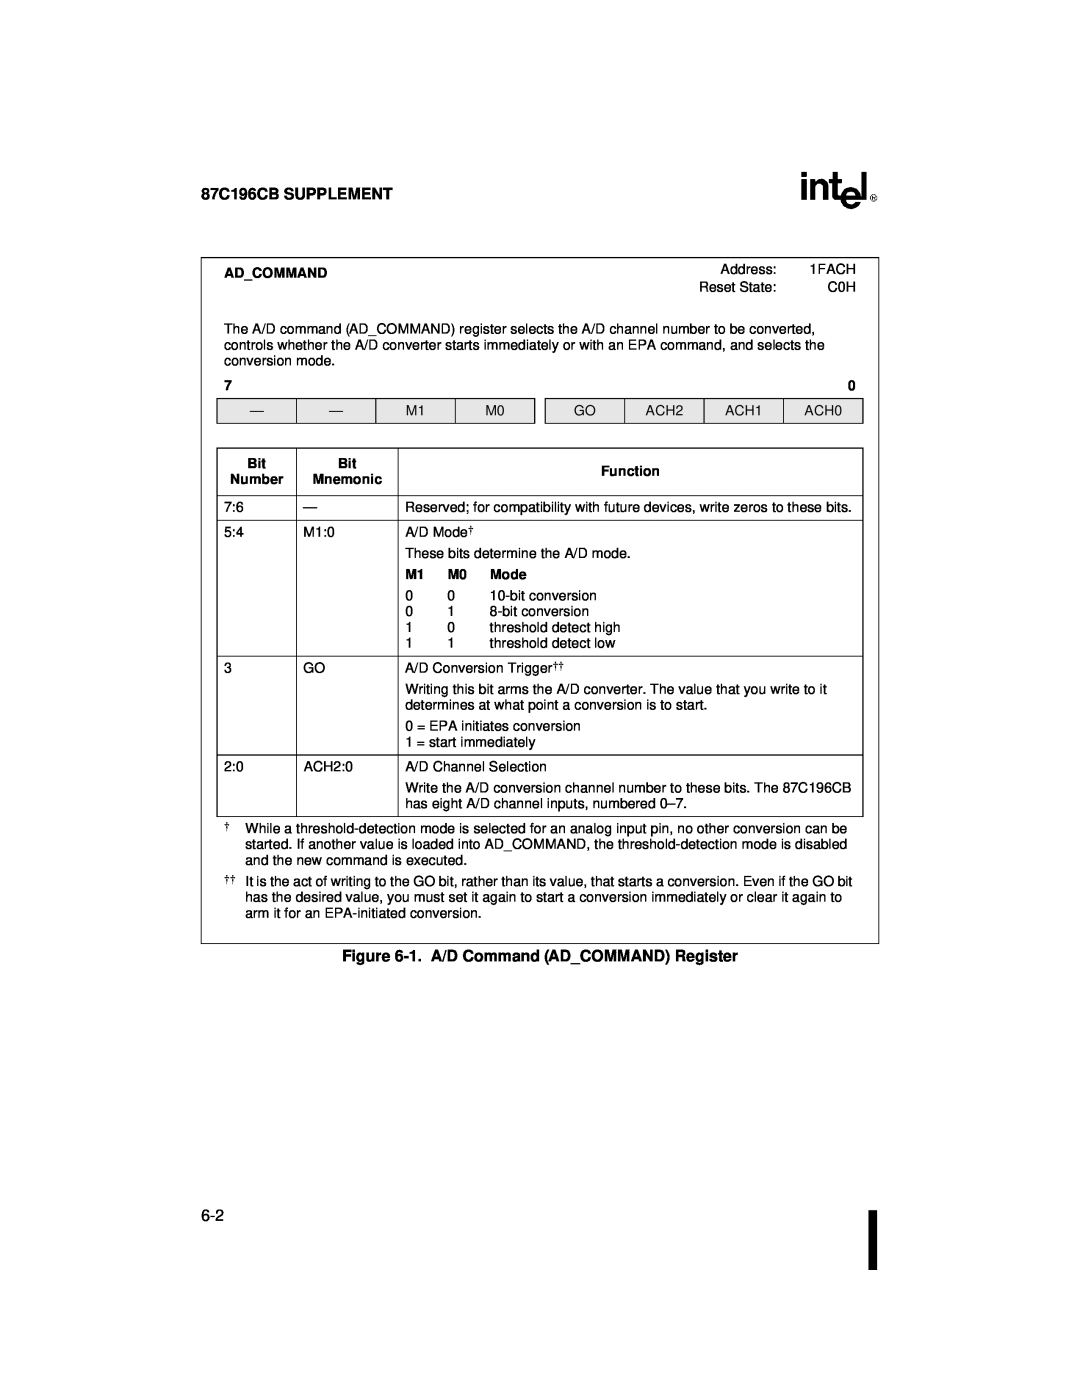 Intel 8XC196NT user manual 87C196CB SUPPLEMENT, 1. A/D Command ADCOMMAND Register, Adcommand, Function, Number, M1 M0, Mode 